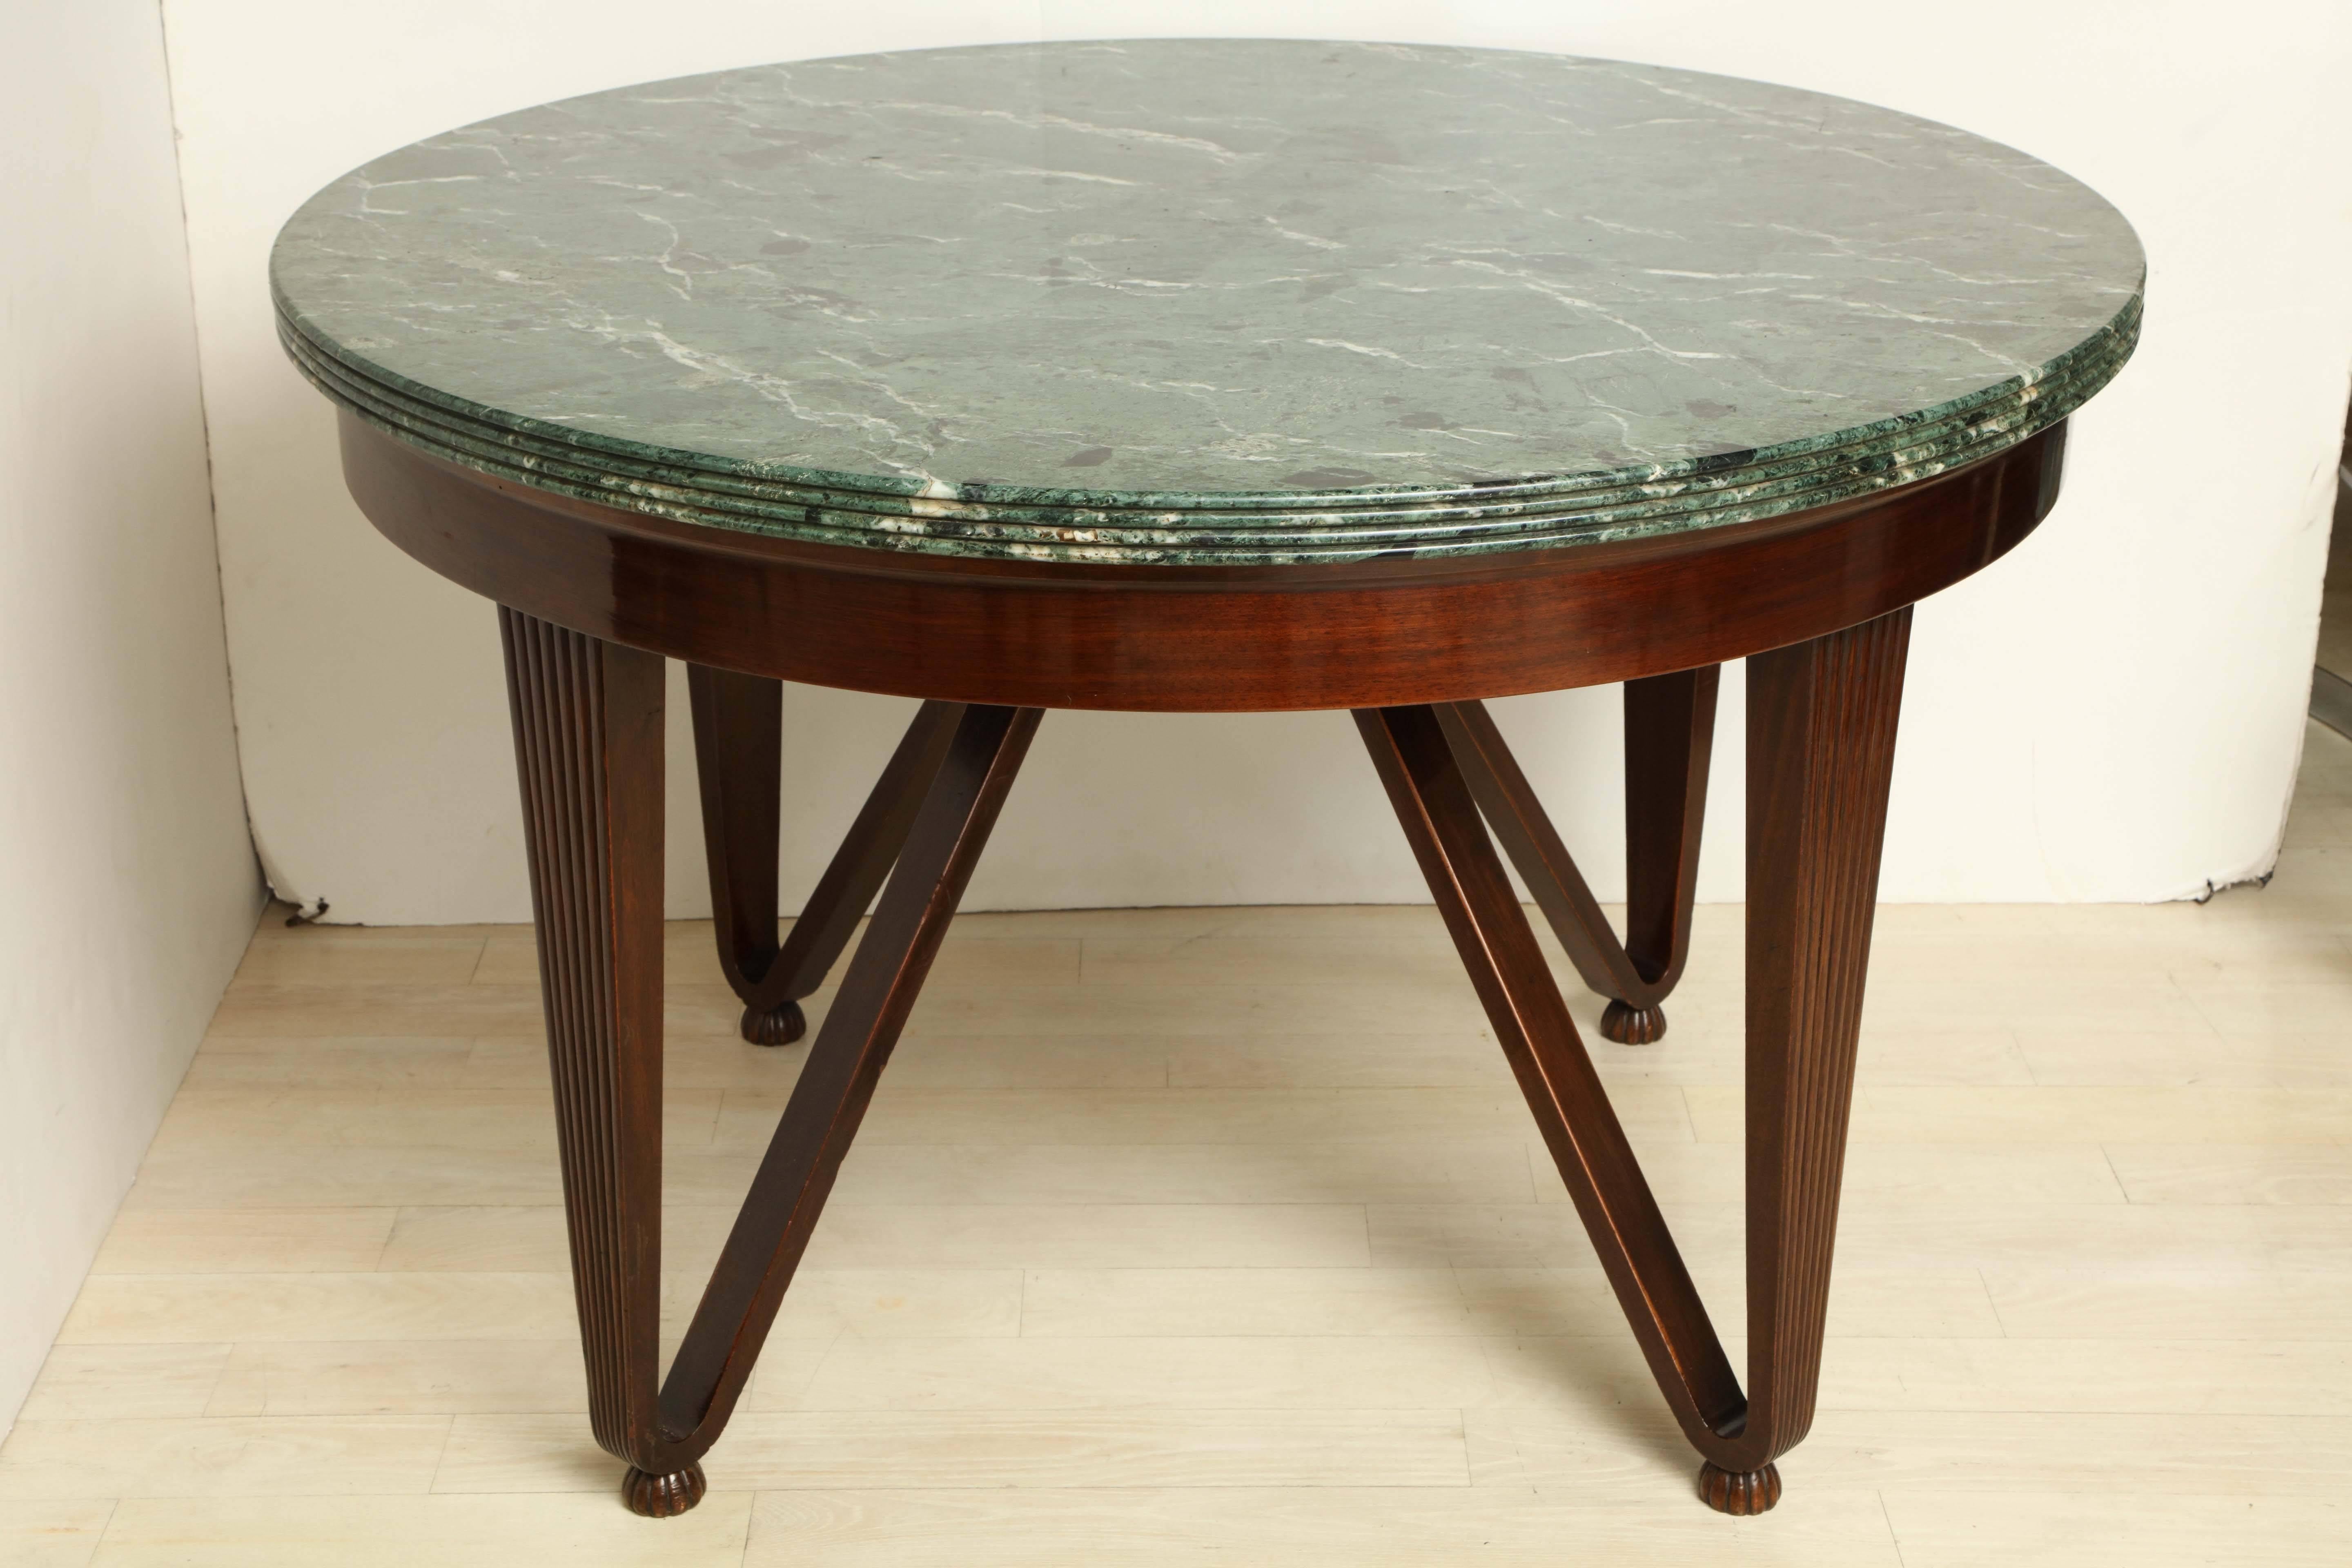 Mid-20th Century Round, Italian Mahogany Center Table with Green Marble Top and Wood Hairpin Legs